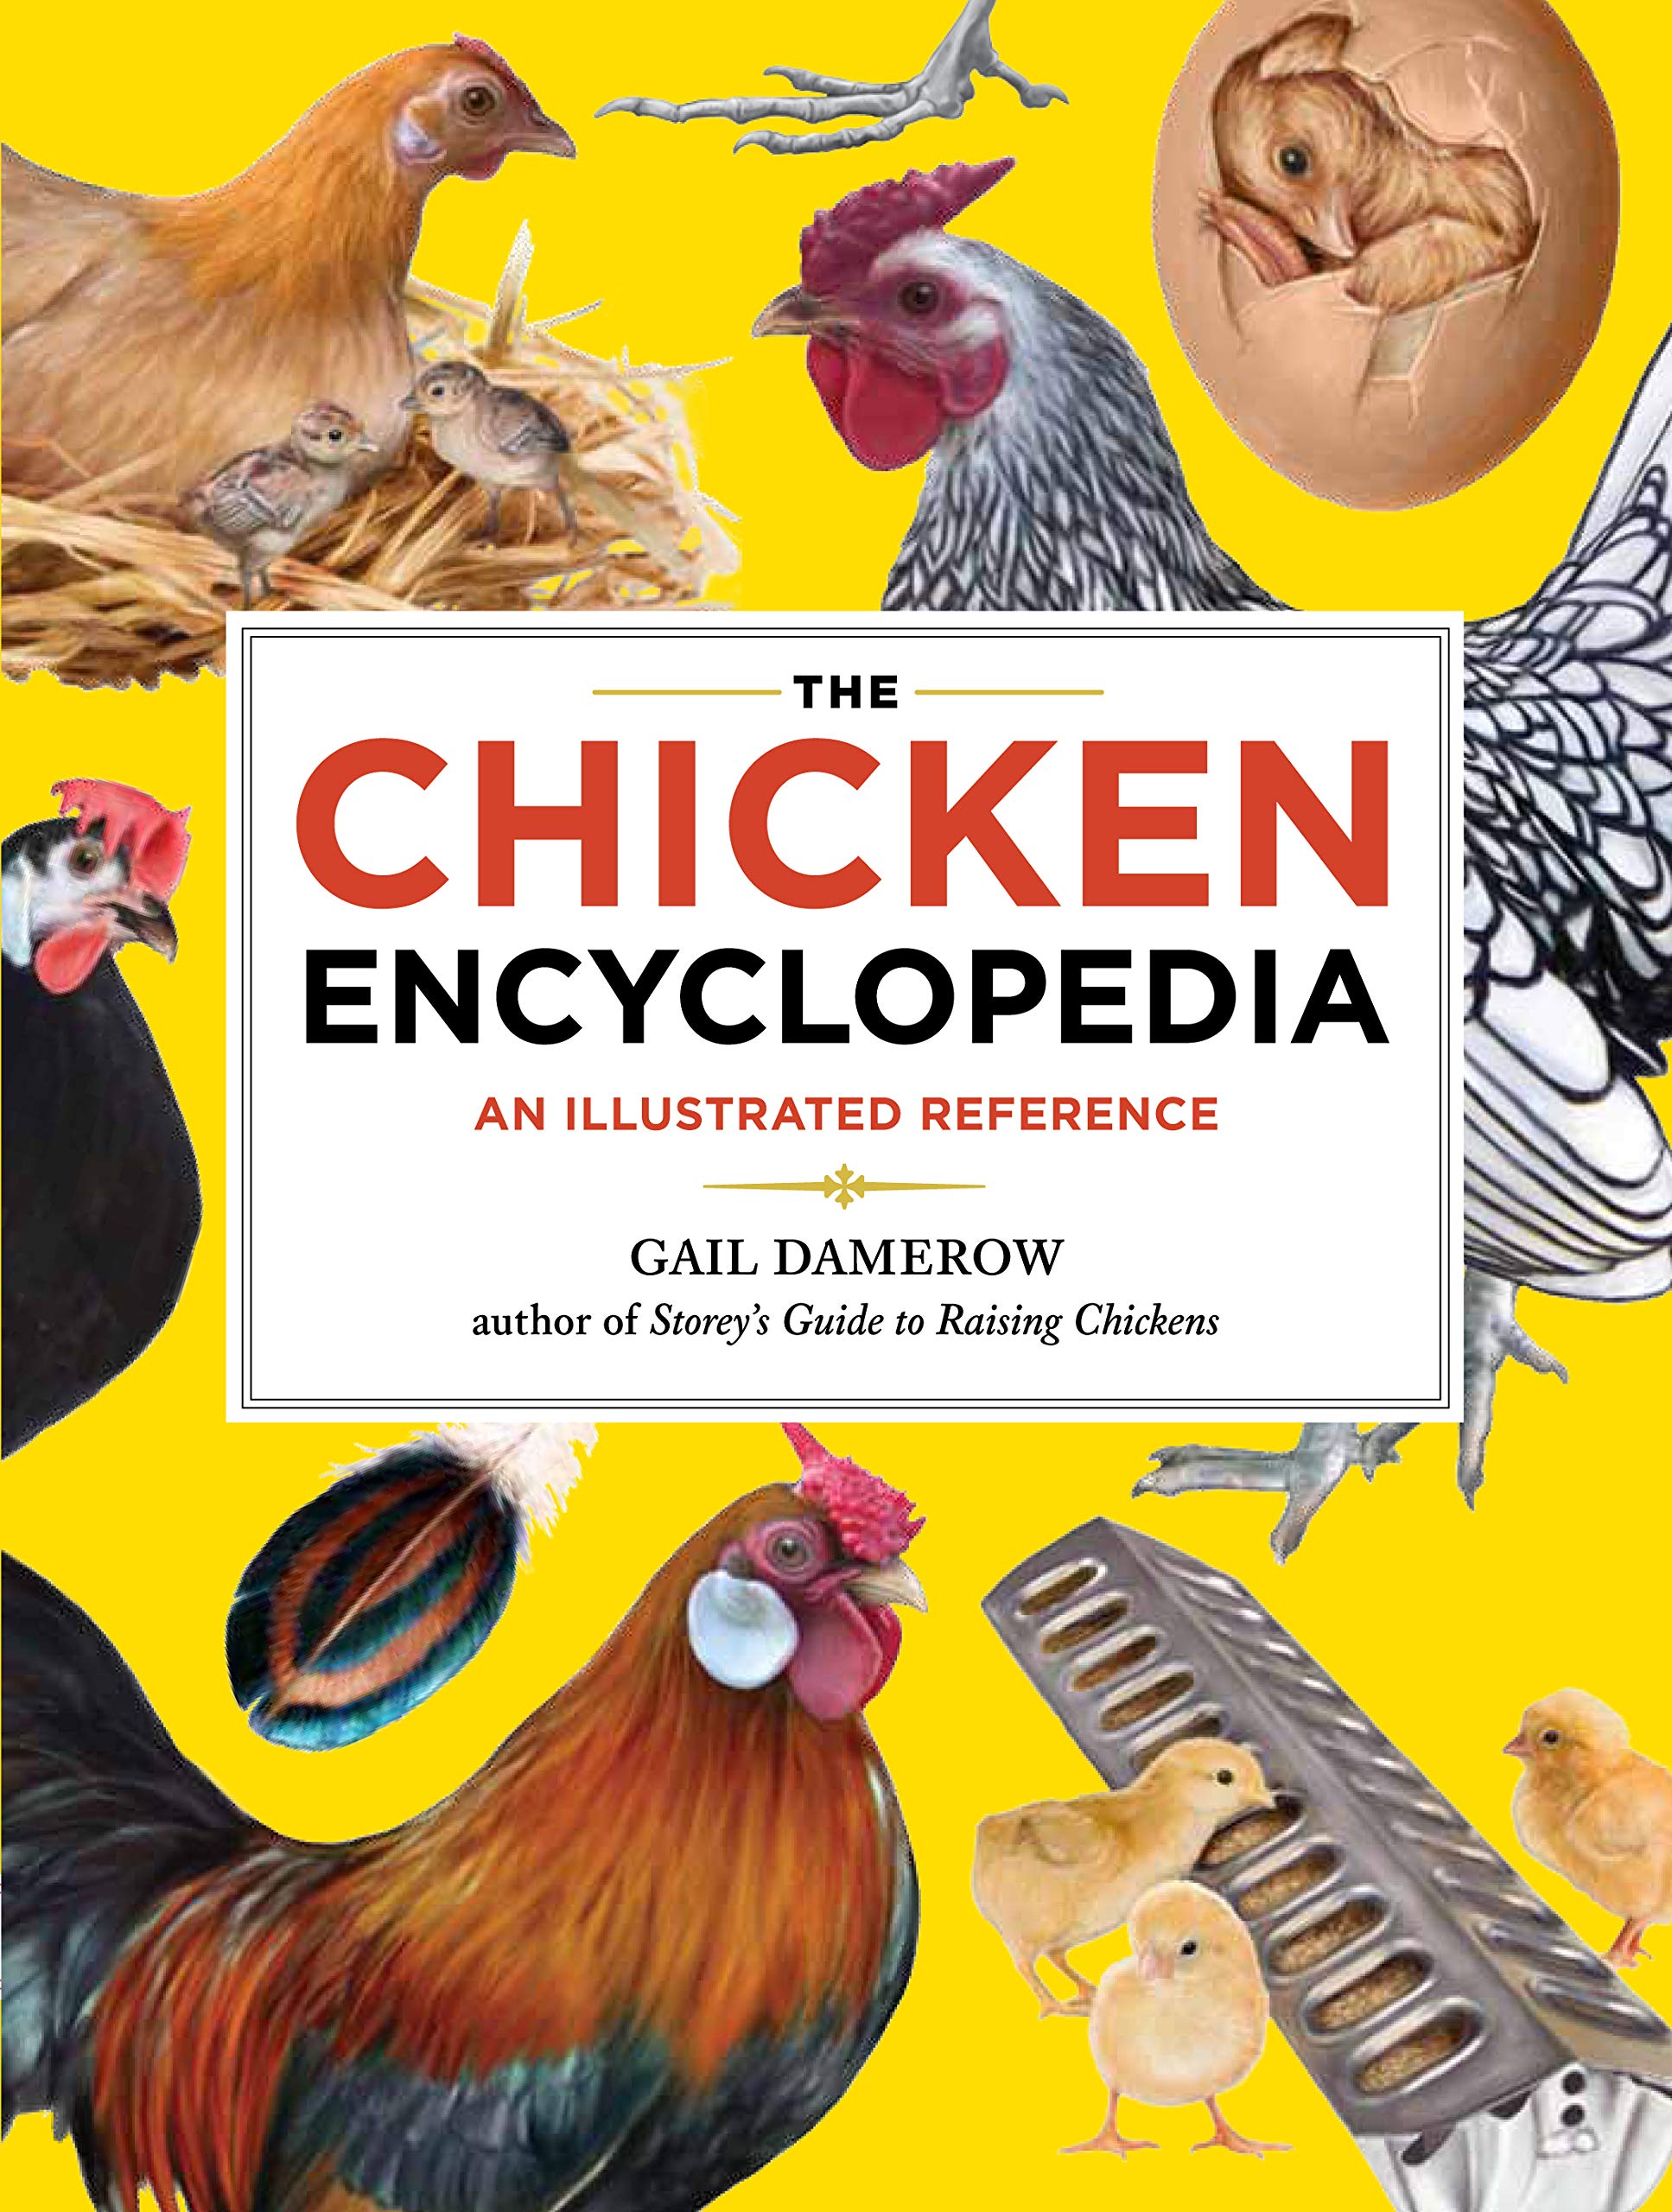 The chicken encyclopedia :  an illustrated reference